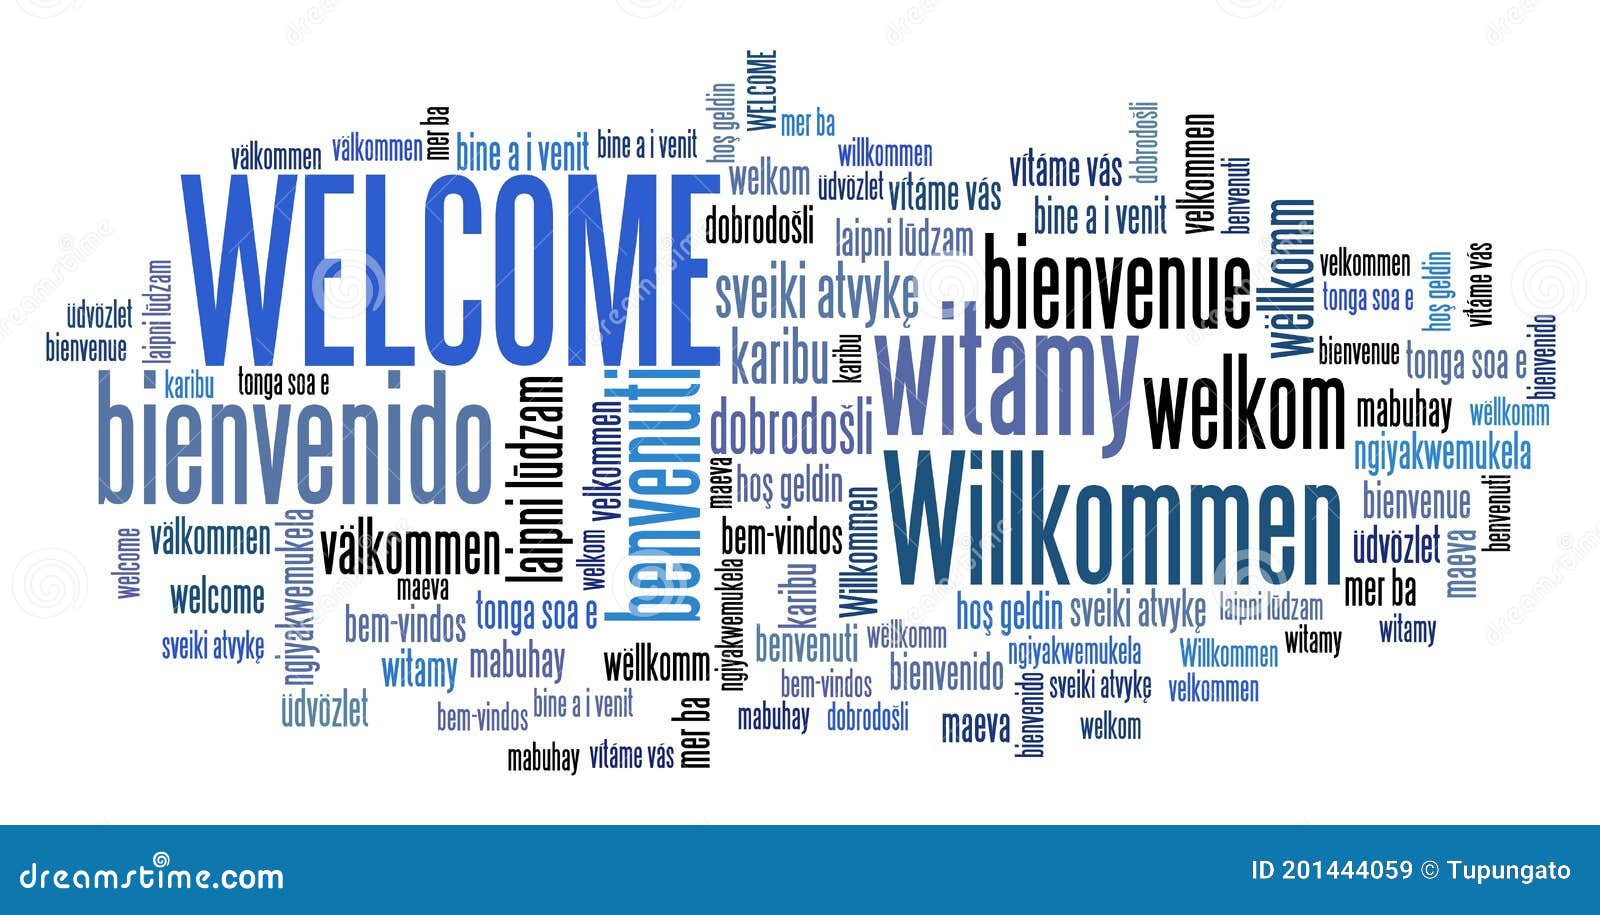 Bienvenido - Welcome Spanish Text - Lettering Vector Royalty Free SVG,  Cliparts, Vectors, and Stock Illustration. Image 27325128.